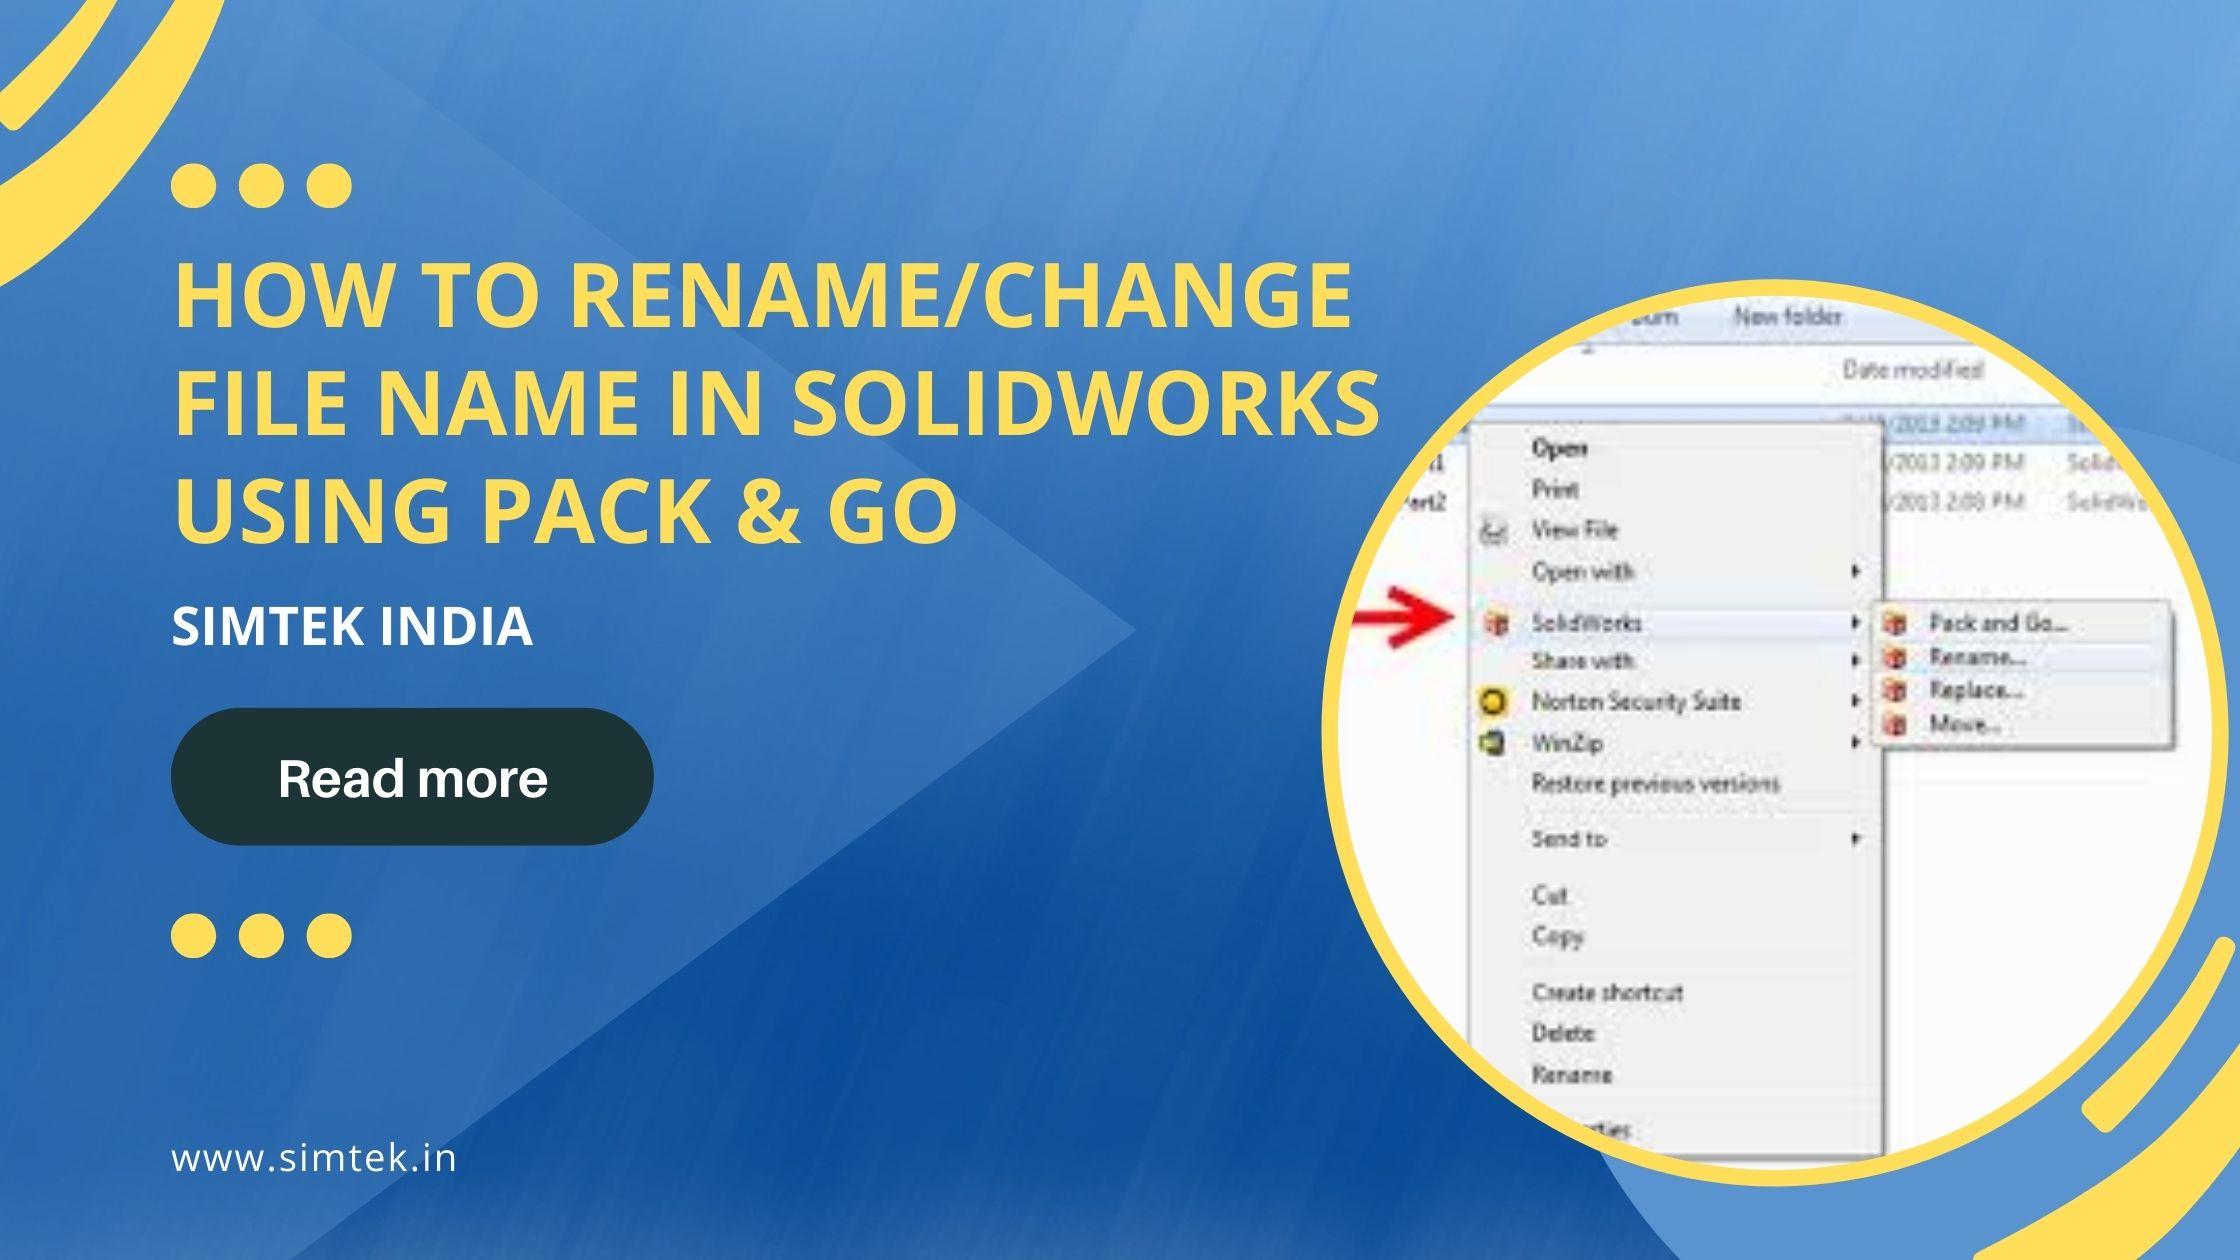 Rename file in SOLIDWORKS using Pack & go